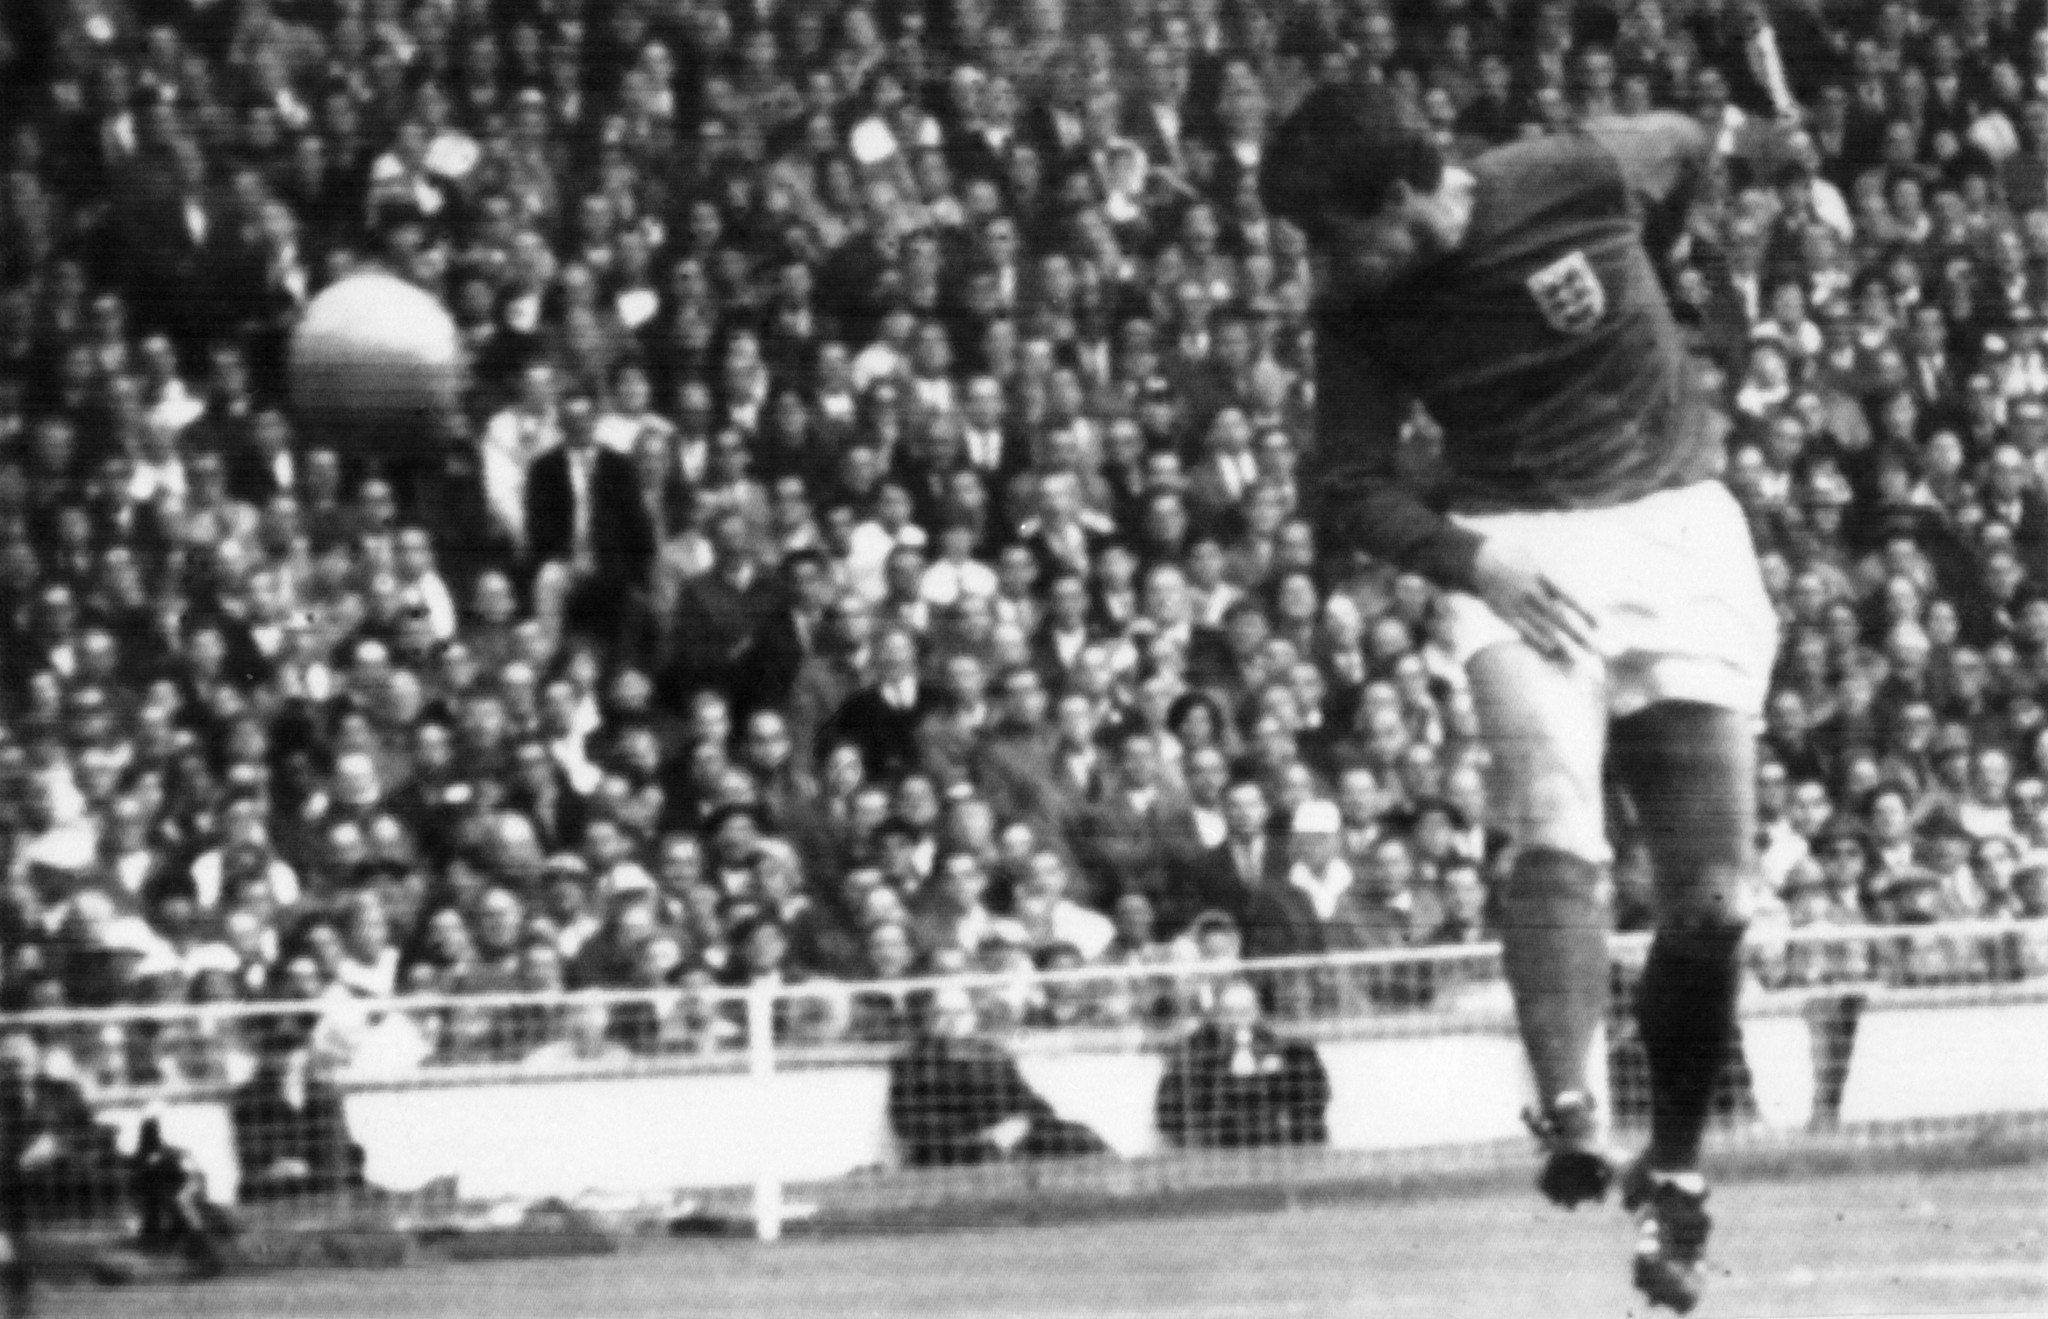 Geoff Hurst heads home England's first goal in the 1966 World Cup final - but heading the ball, for younger players in particular, is now under increasing scrutiny on health grounds ©Getty Images